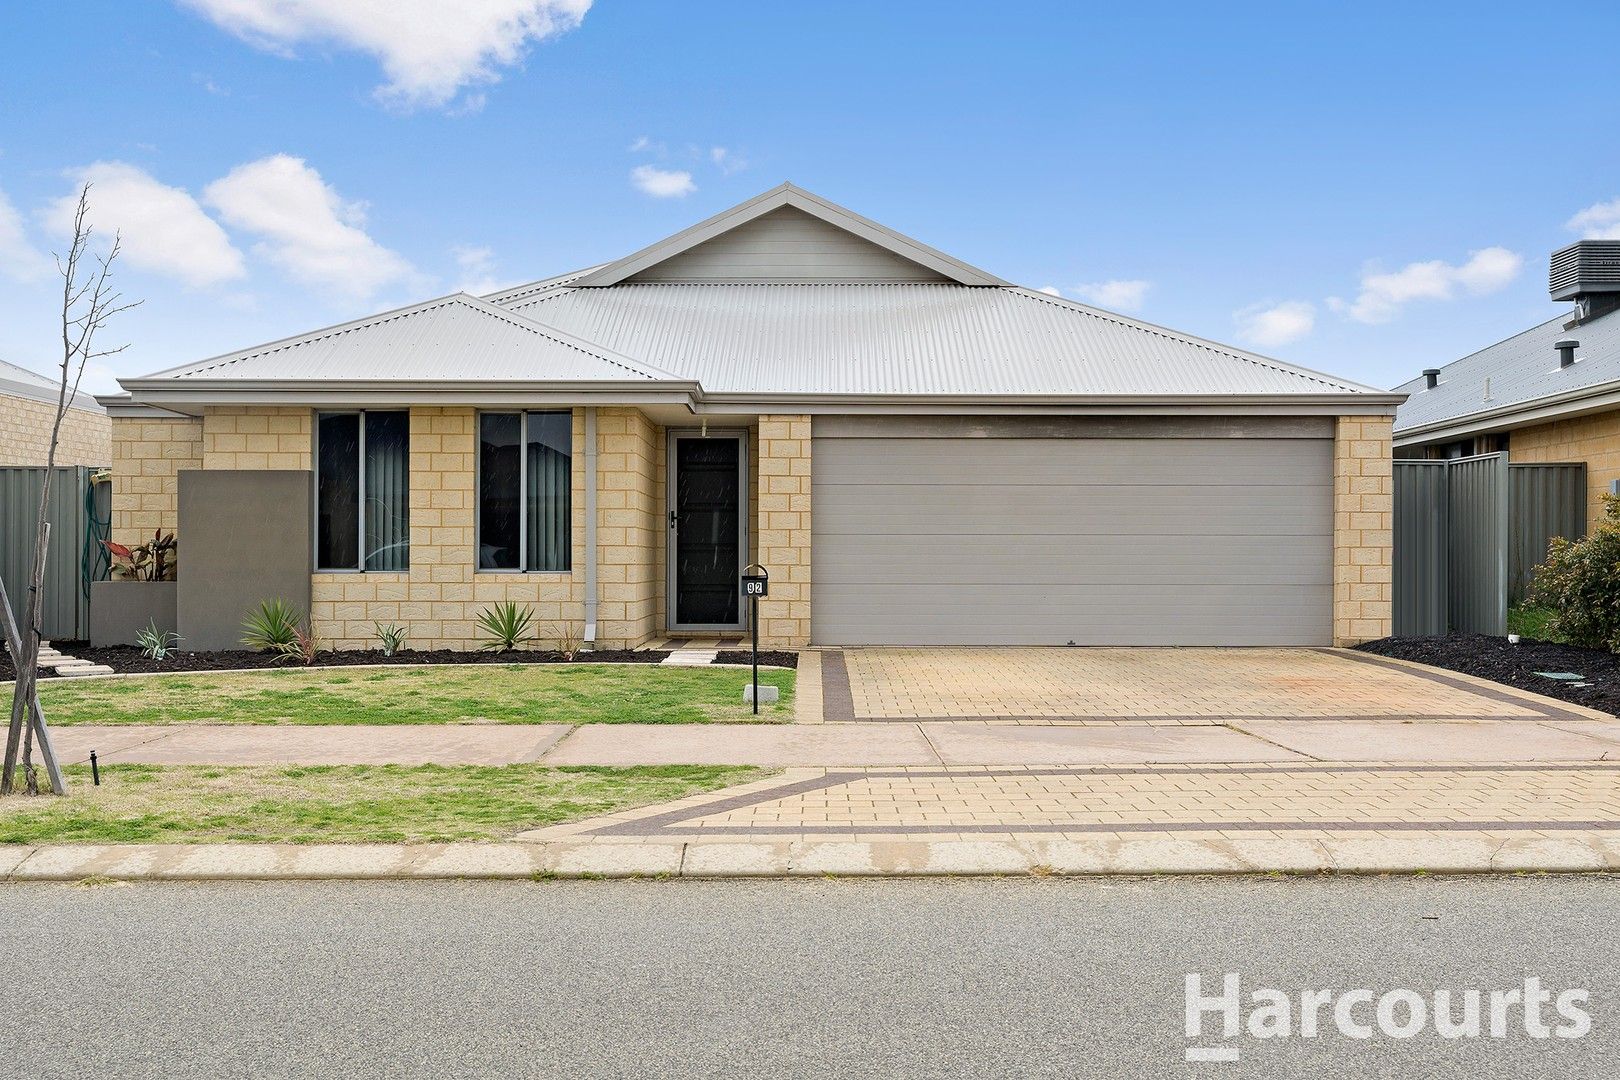 4 bedrooms House in 92 Weewar Circuit SOUTH YUNDERUP WA, 6208